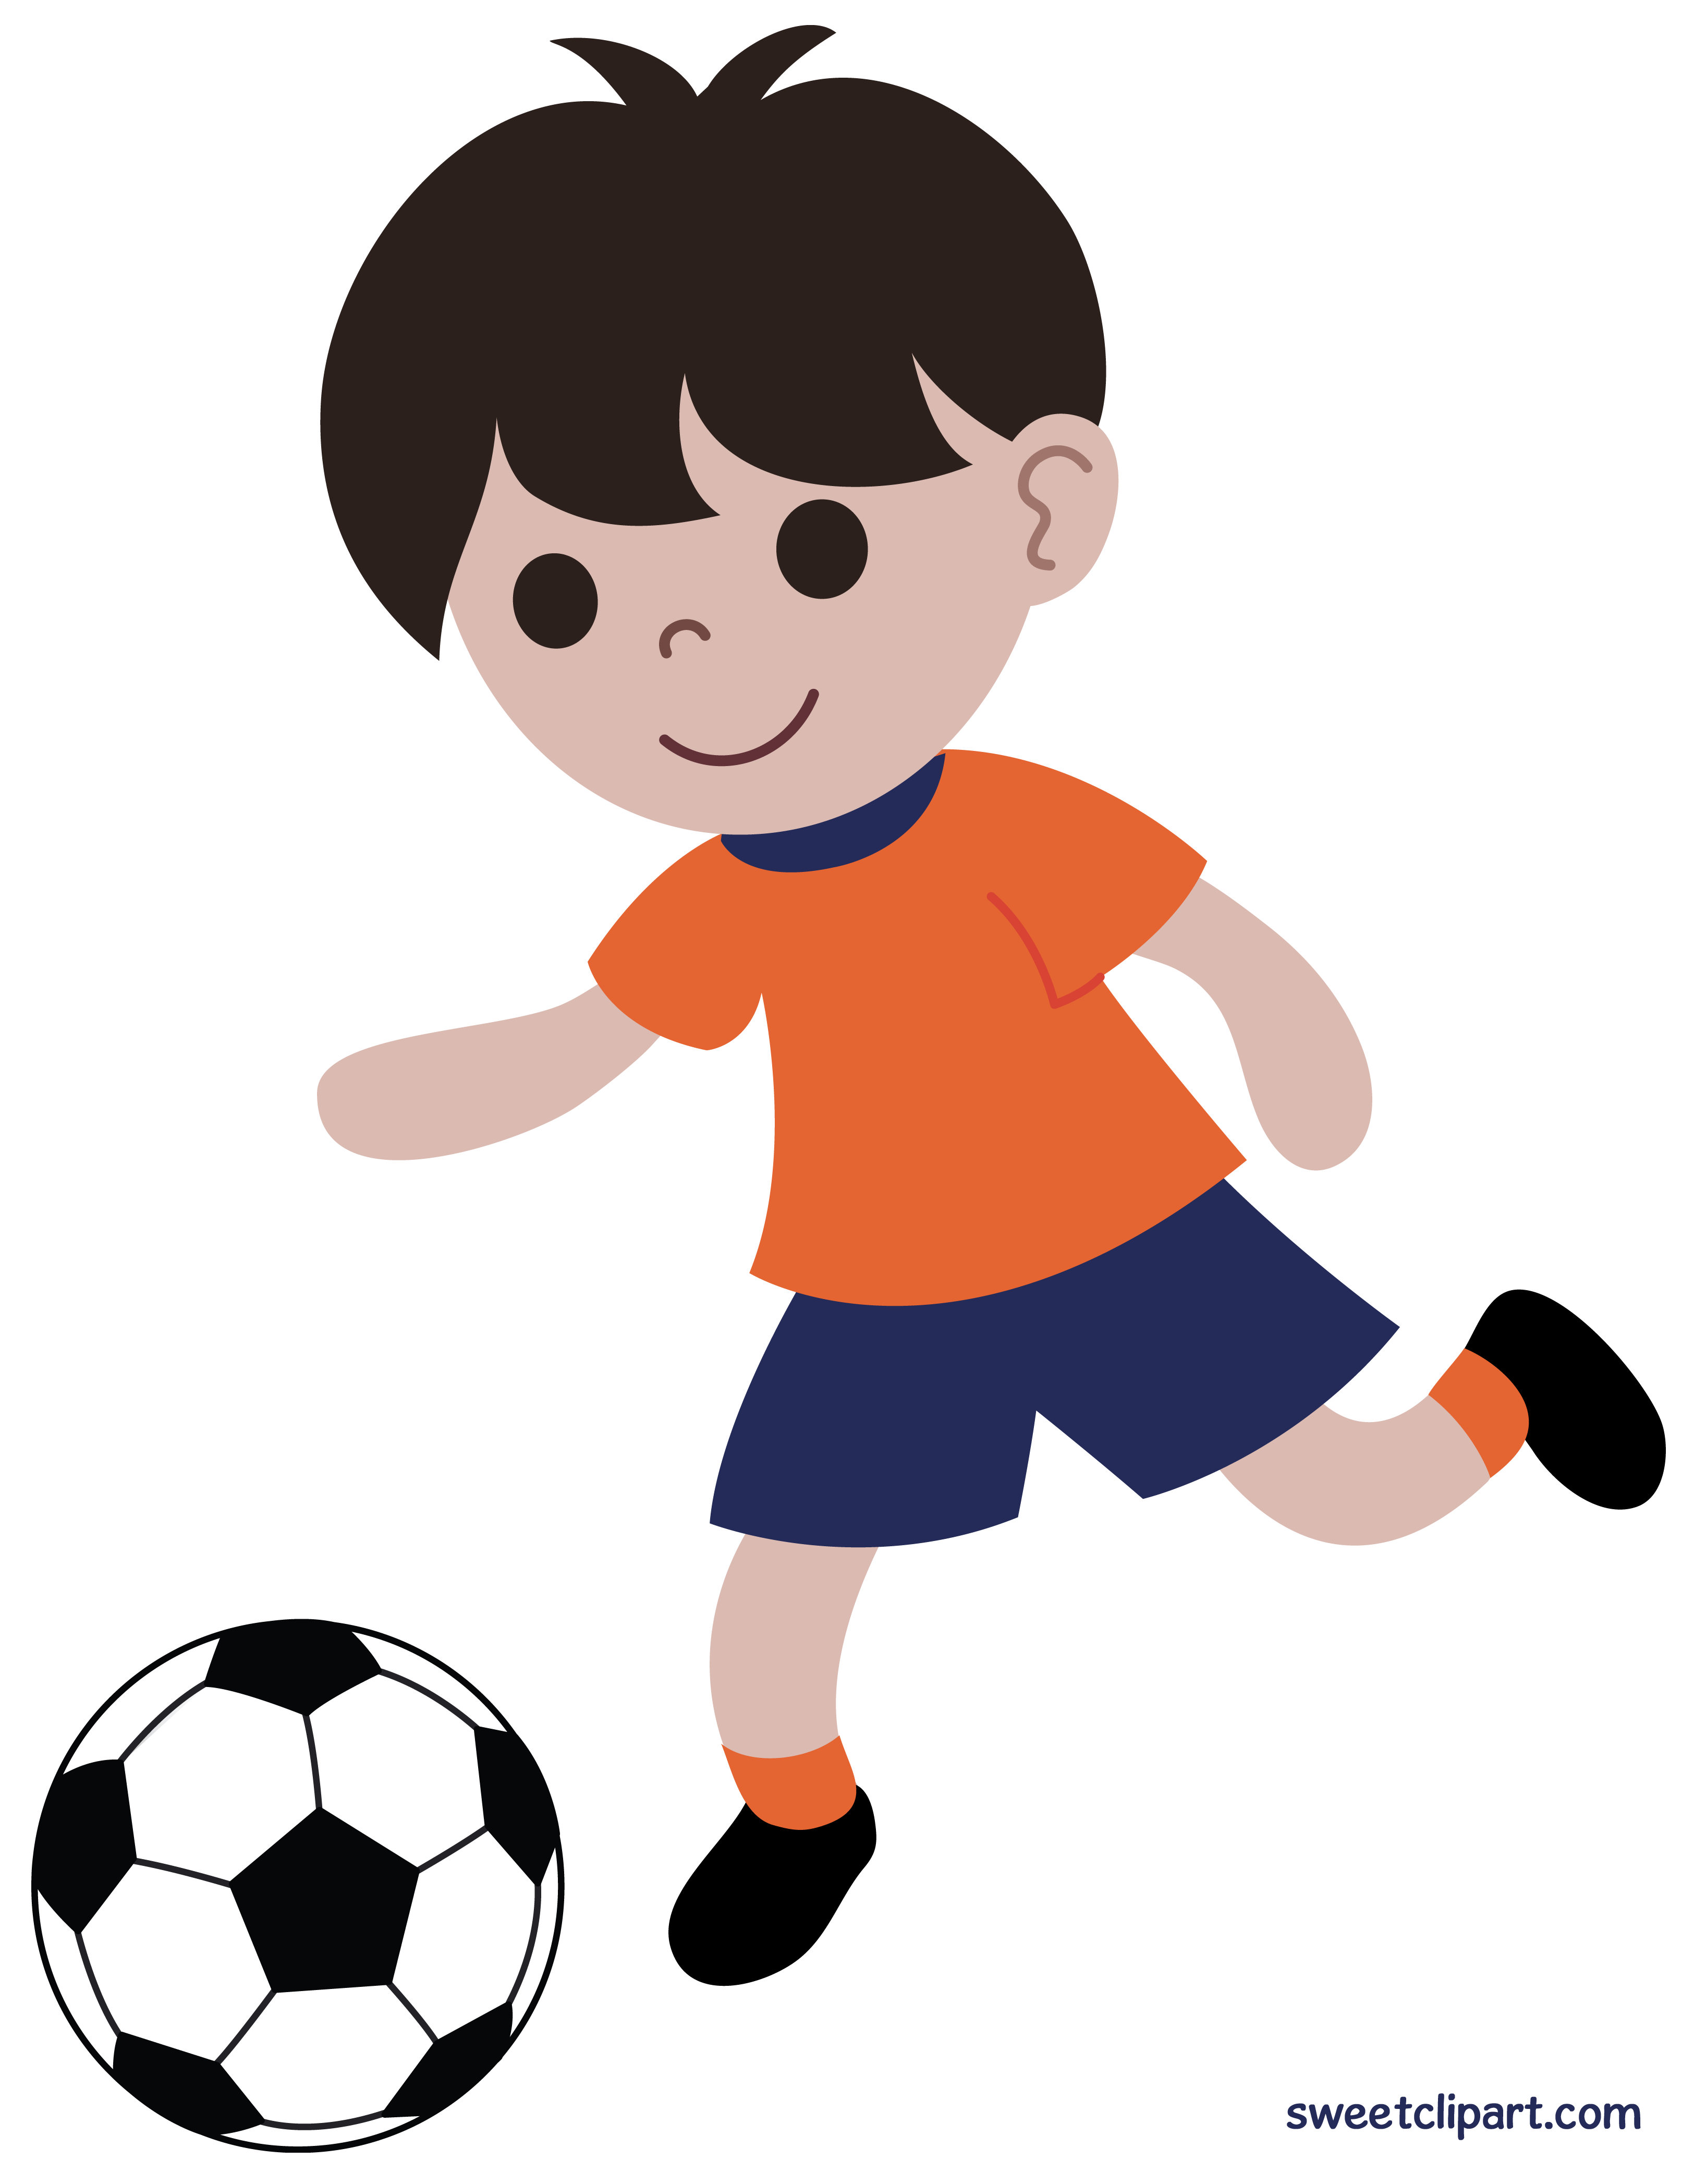 Megaphone clipart sport. Boy playing soccer or